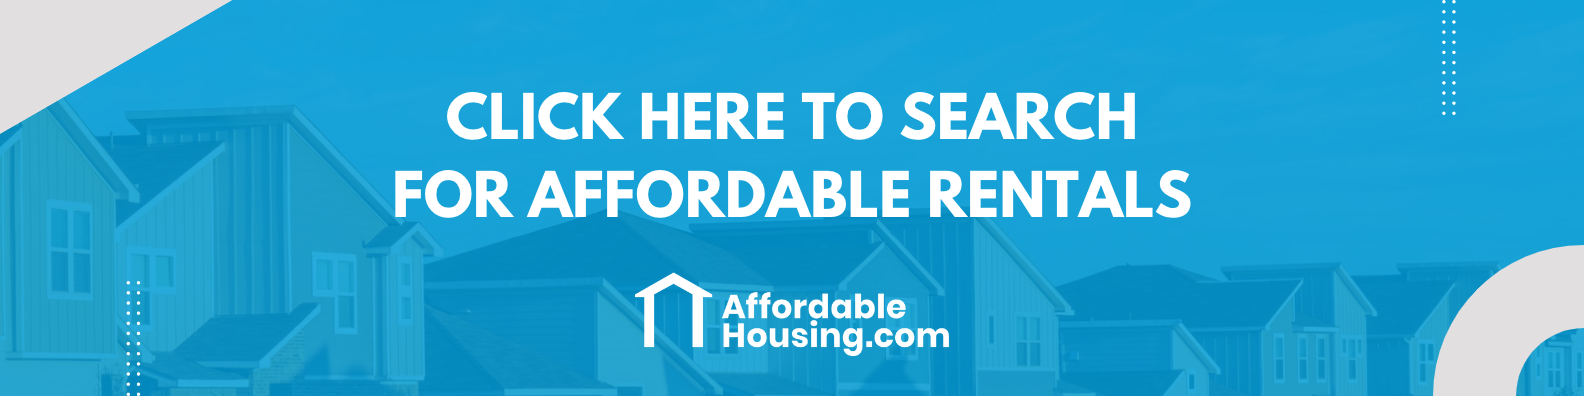 Affordable Housing Property Search Banner.png